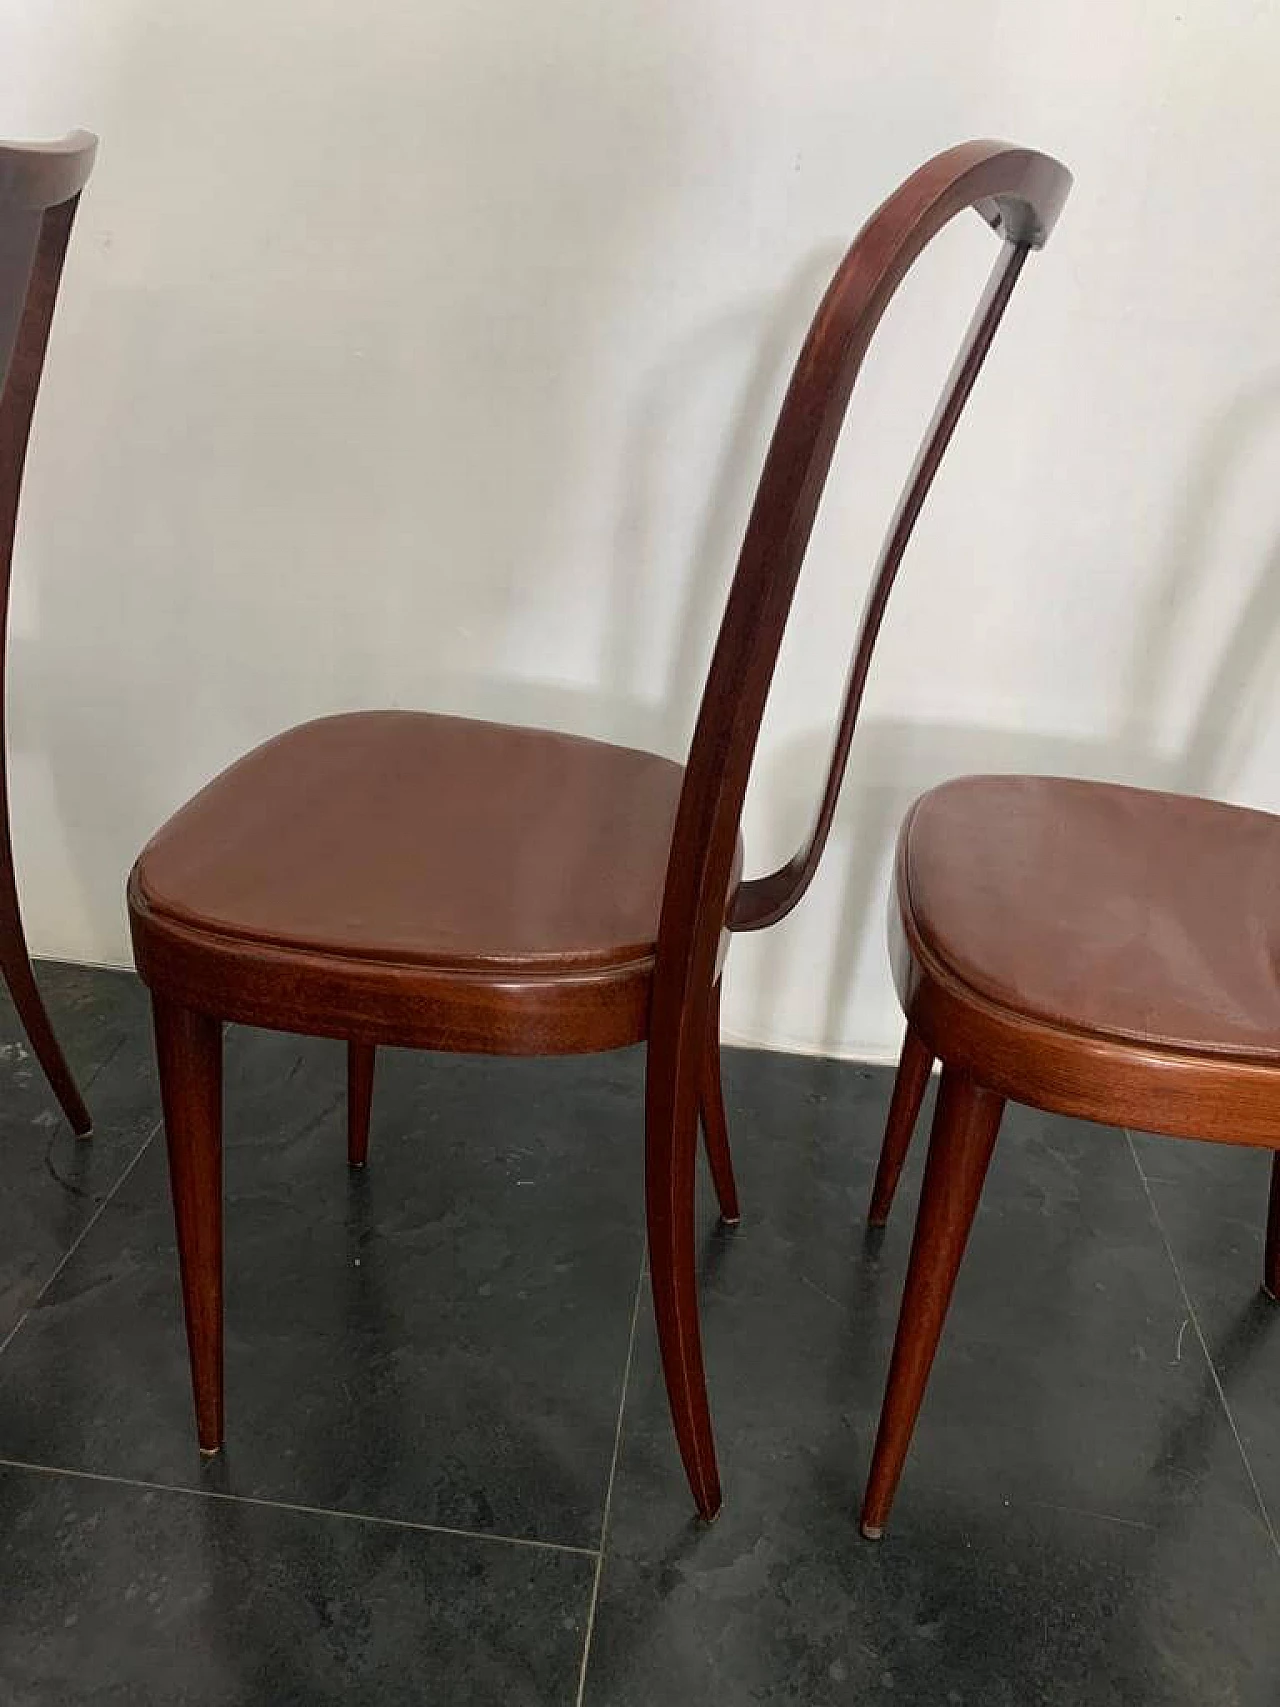 6 Dining chairs with leatherette seat by Pirelli Sapsa, 1950s 1201313